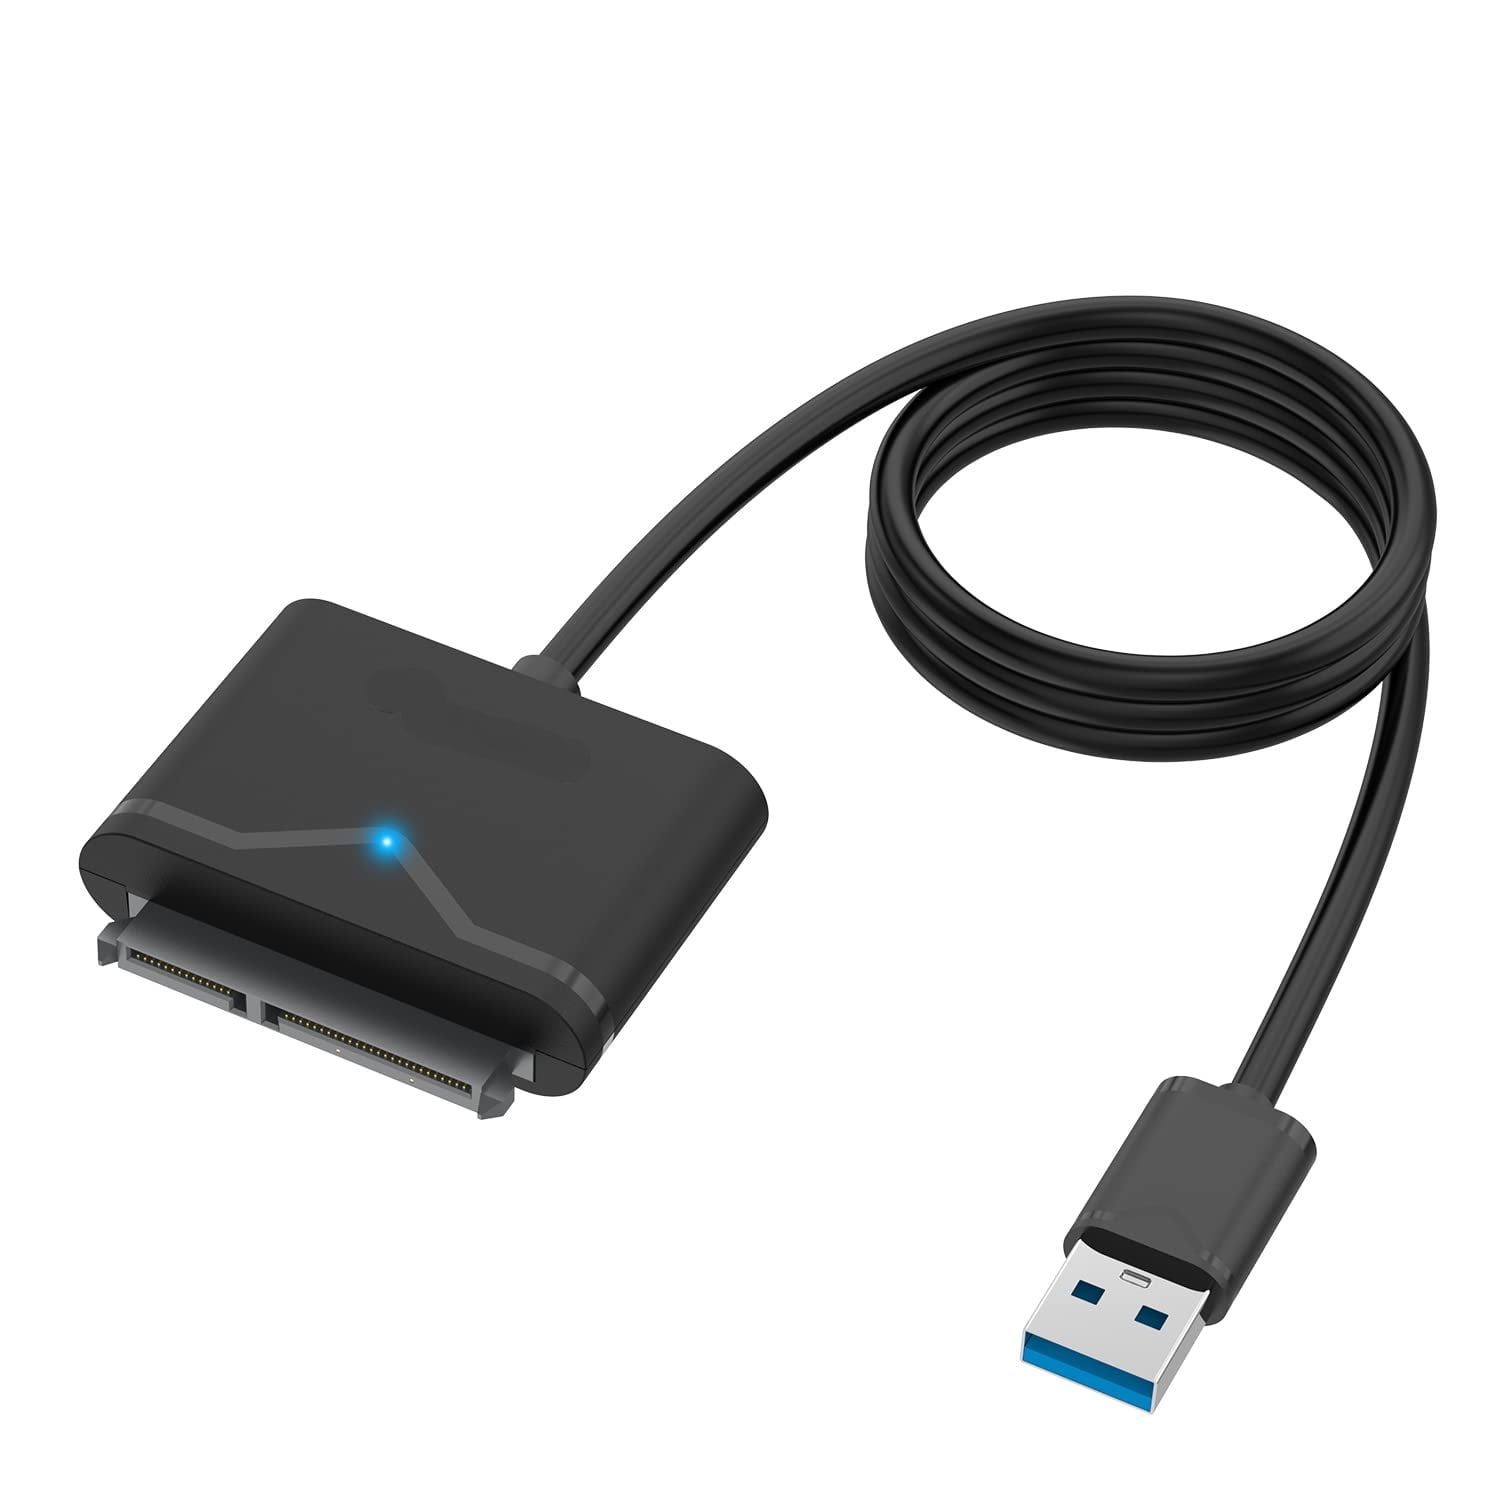 USB 3.0 to SATA Adapter Cable, External SATA III Hard Drive Connector 2.5'' SSD/HDD & 3.5" HDD Data Transfer, Support UASP, Trim S.M.A.R.T. with 3 mins Auto-Sleep, Max 18TB -